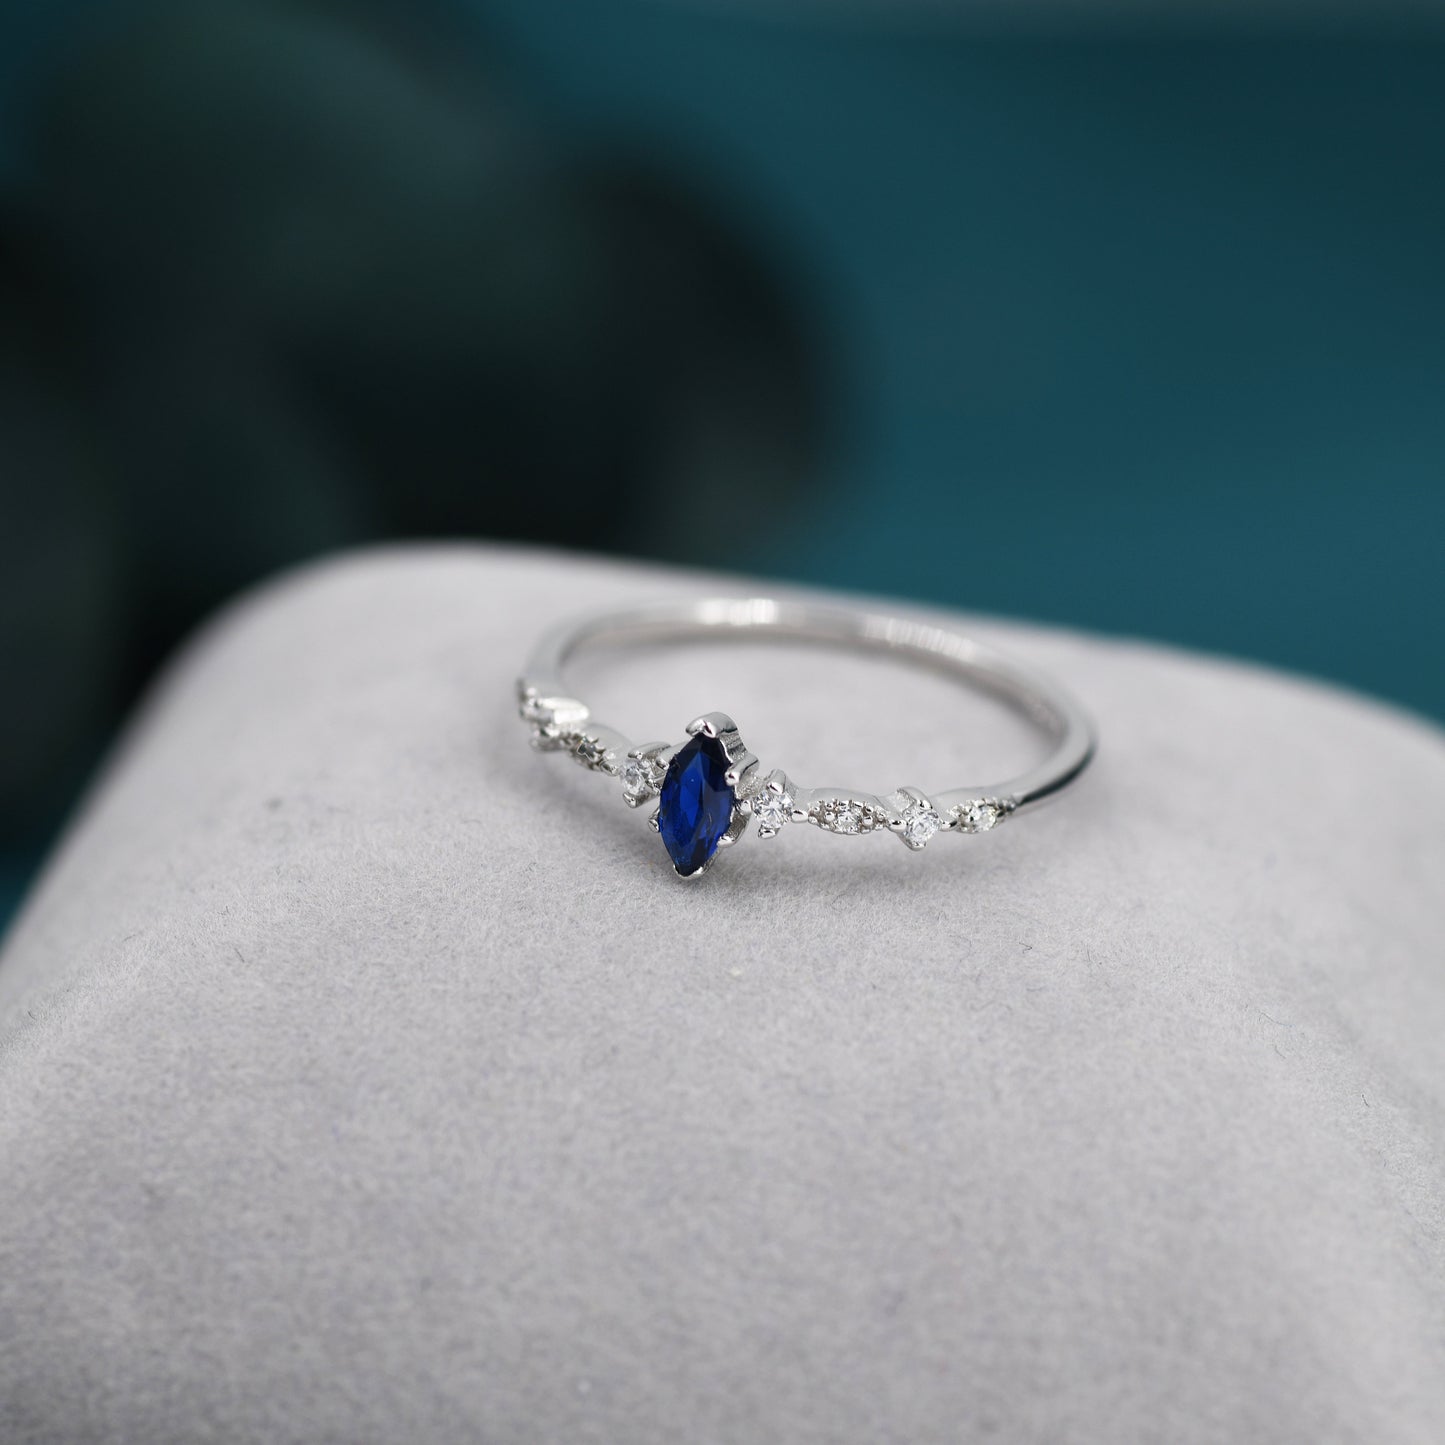 Vintage Inspired Sapphire Blue CZ Ring in Sterling Silver, Marquise Ring, Delicate Sapphire Ring, Size US 5 - 8